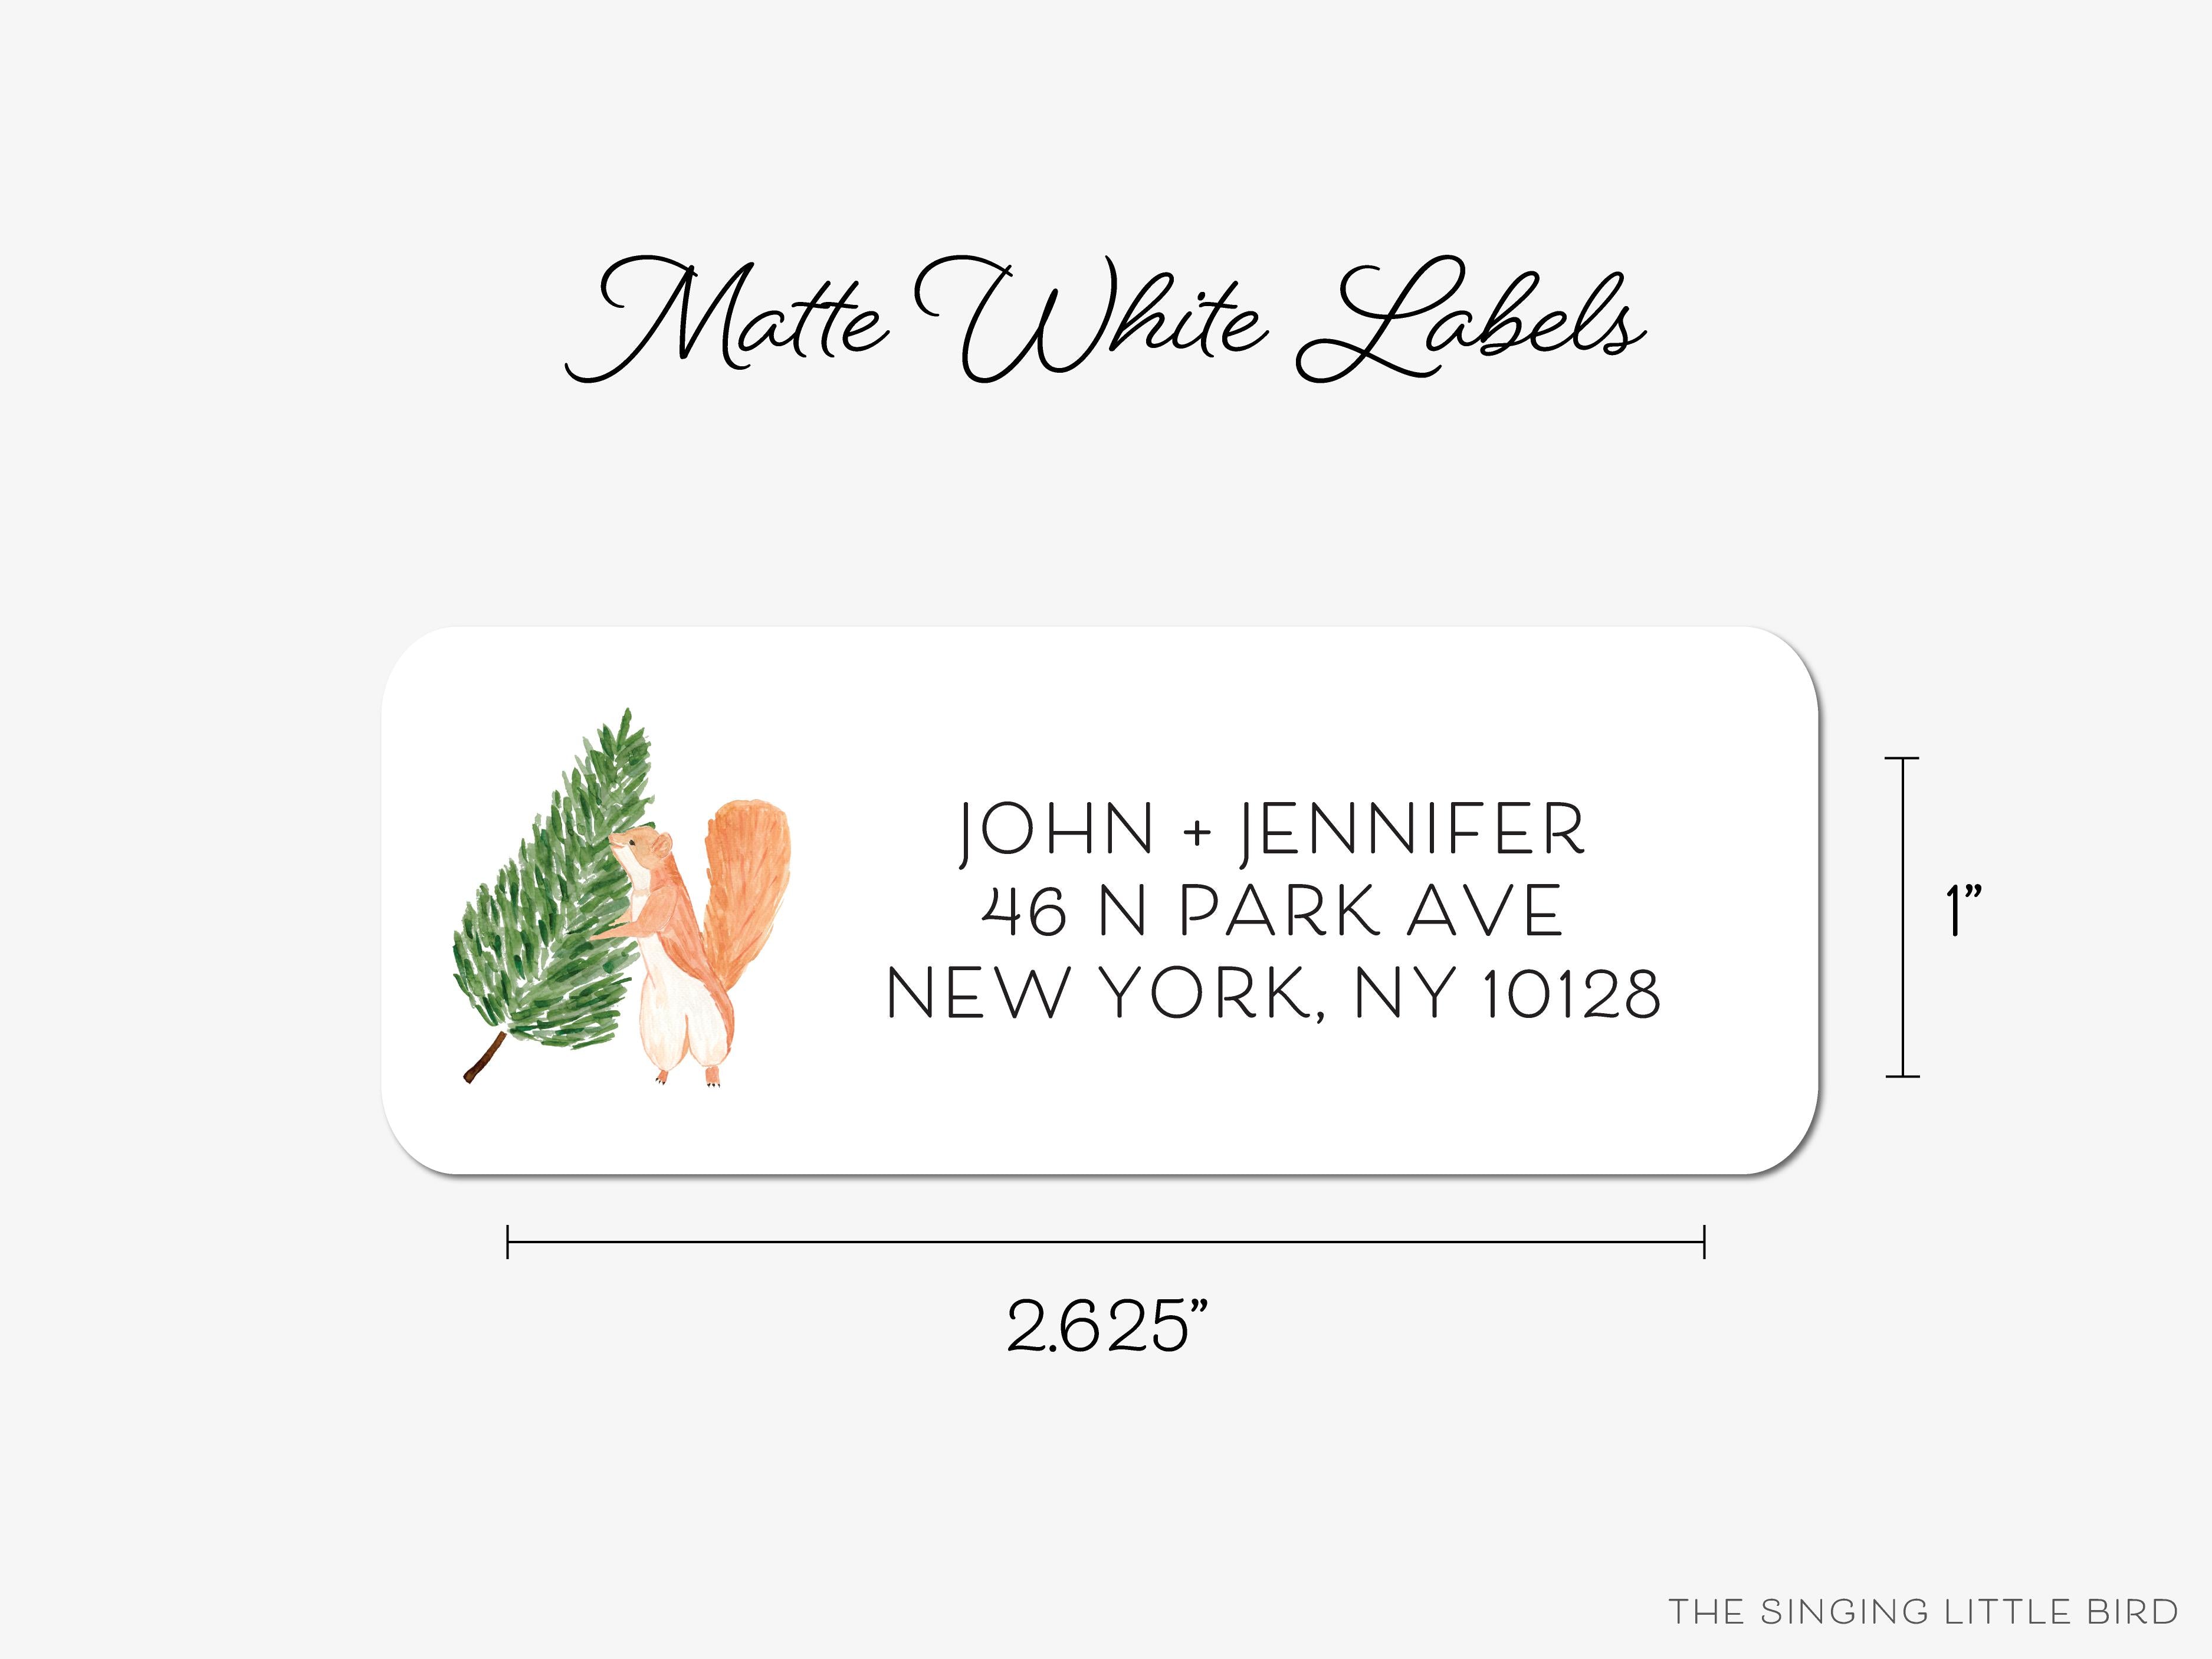 Tree Squirrel Return Address Labels- These personalized return address labels are 2.625" x 1" and feature our hand-painted watercolor tree and squirrel, printed in the USA on beautiful matte finish labels. These make great gifts for yourself or the animal lover. -The Singing Little Bird